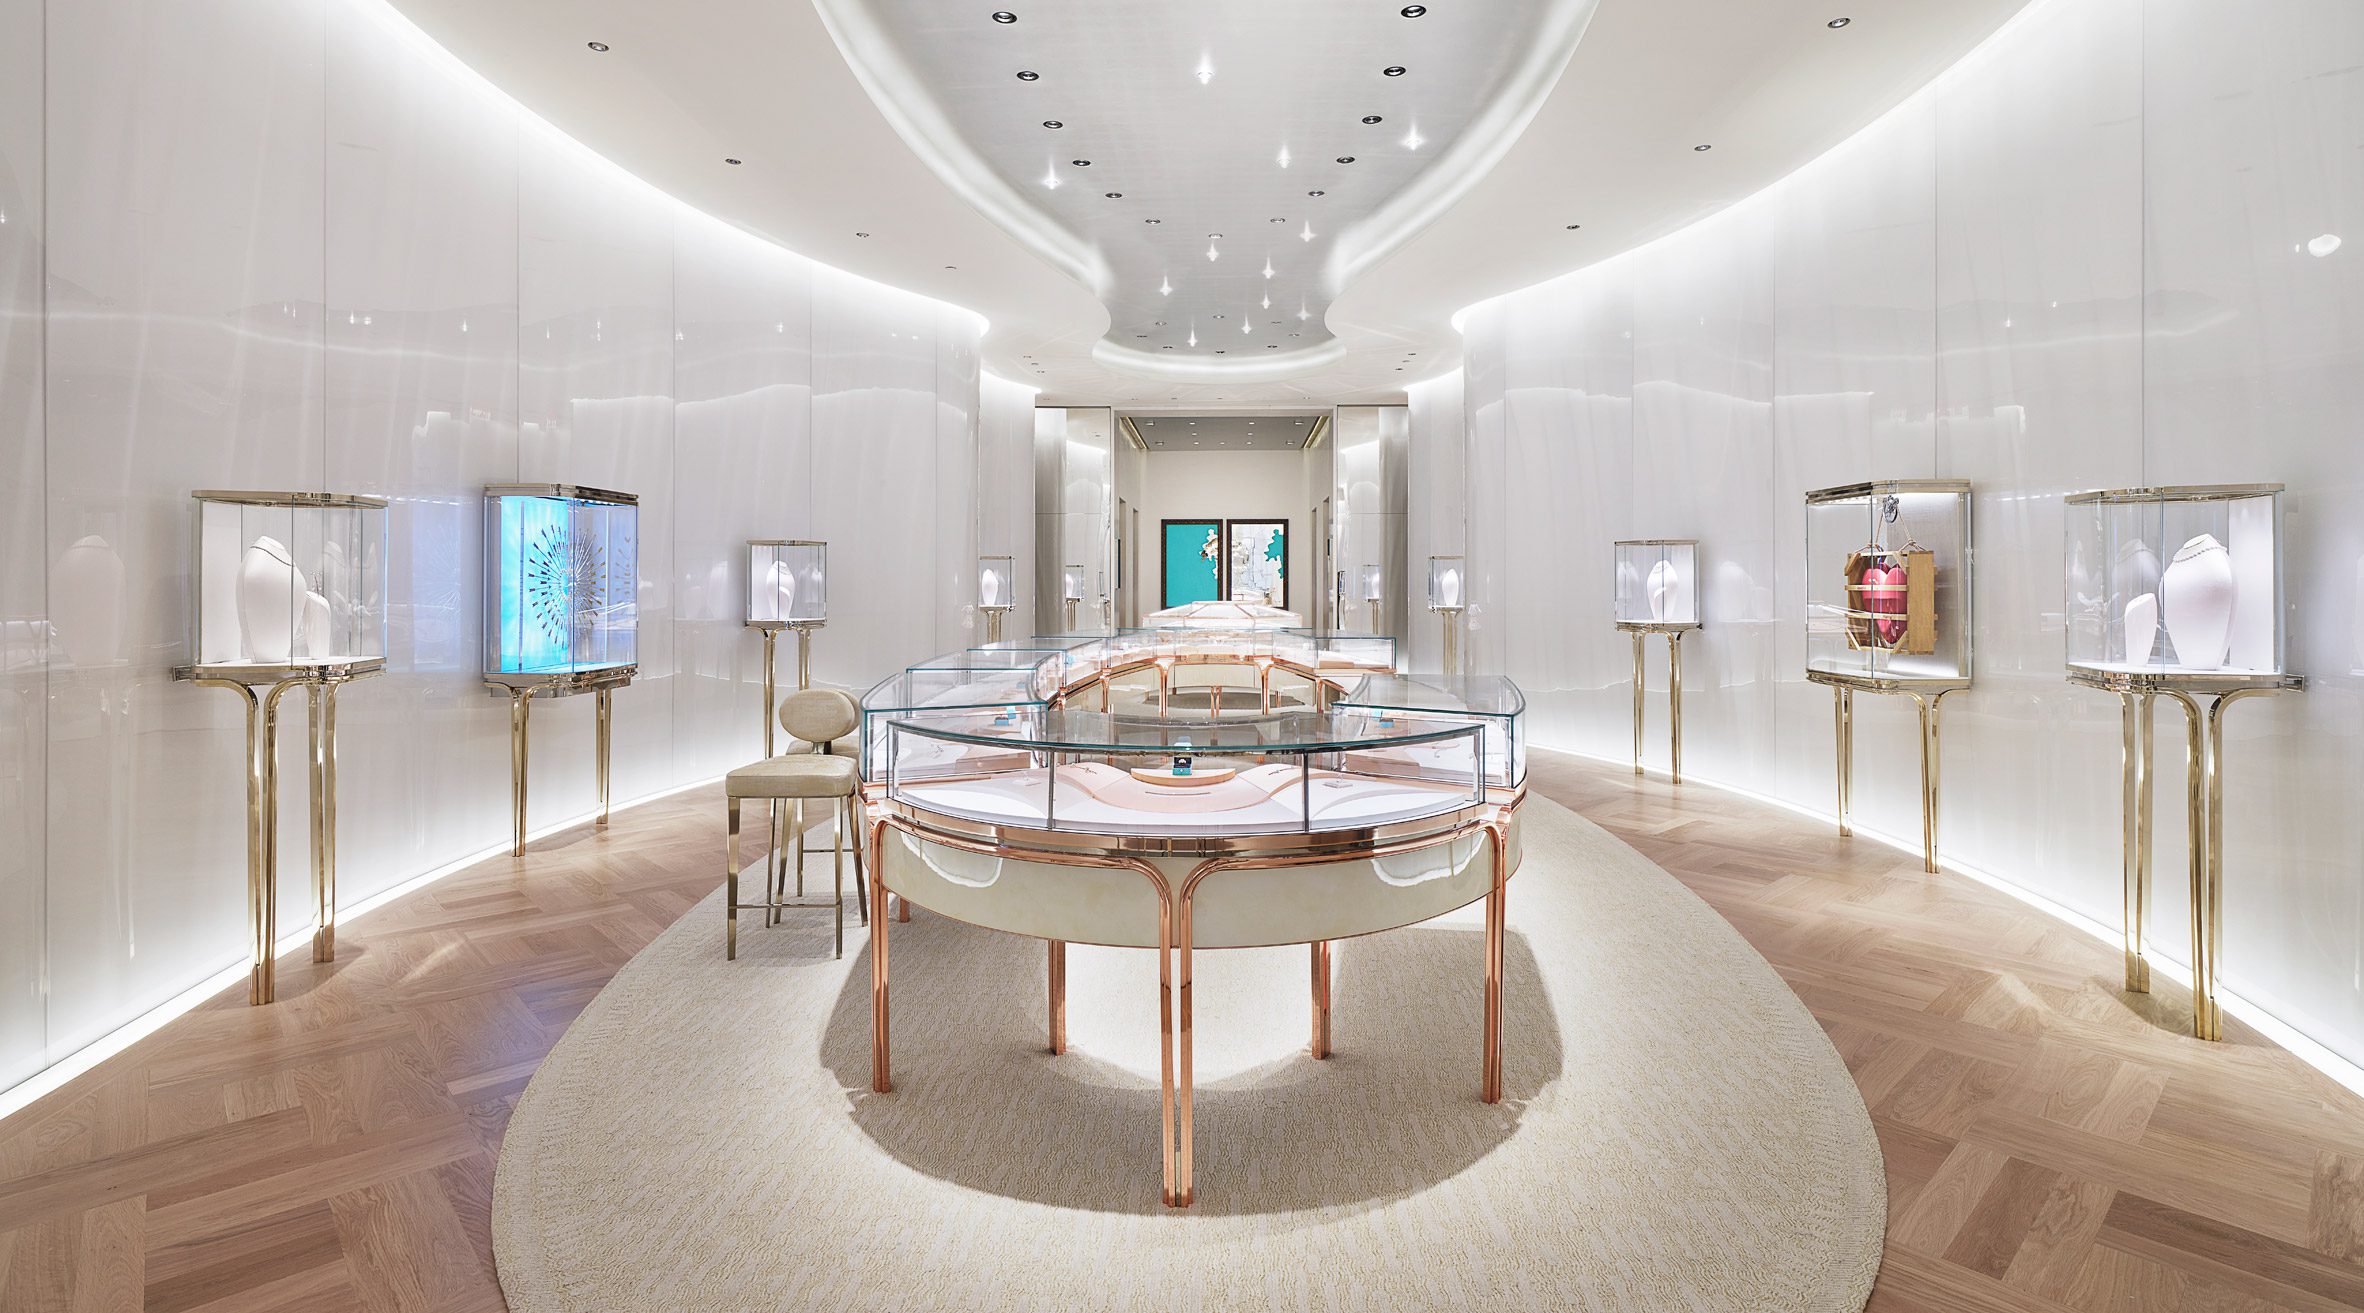 Tiffany & Co's Paris pop-up by OMA takes visitors on journey across time